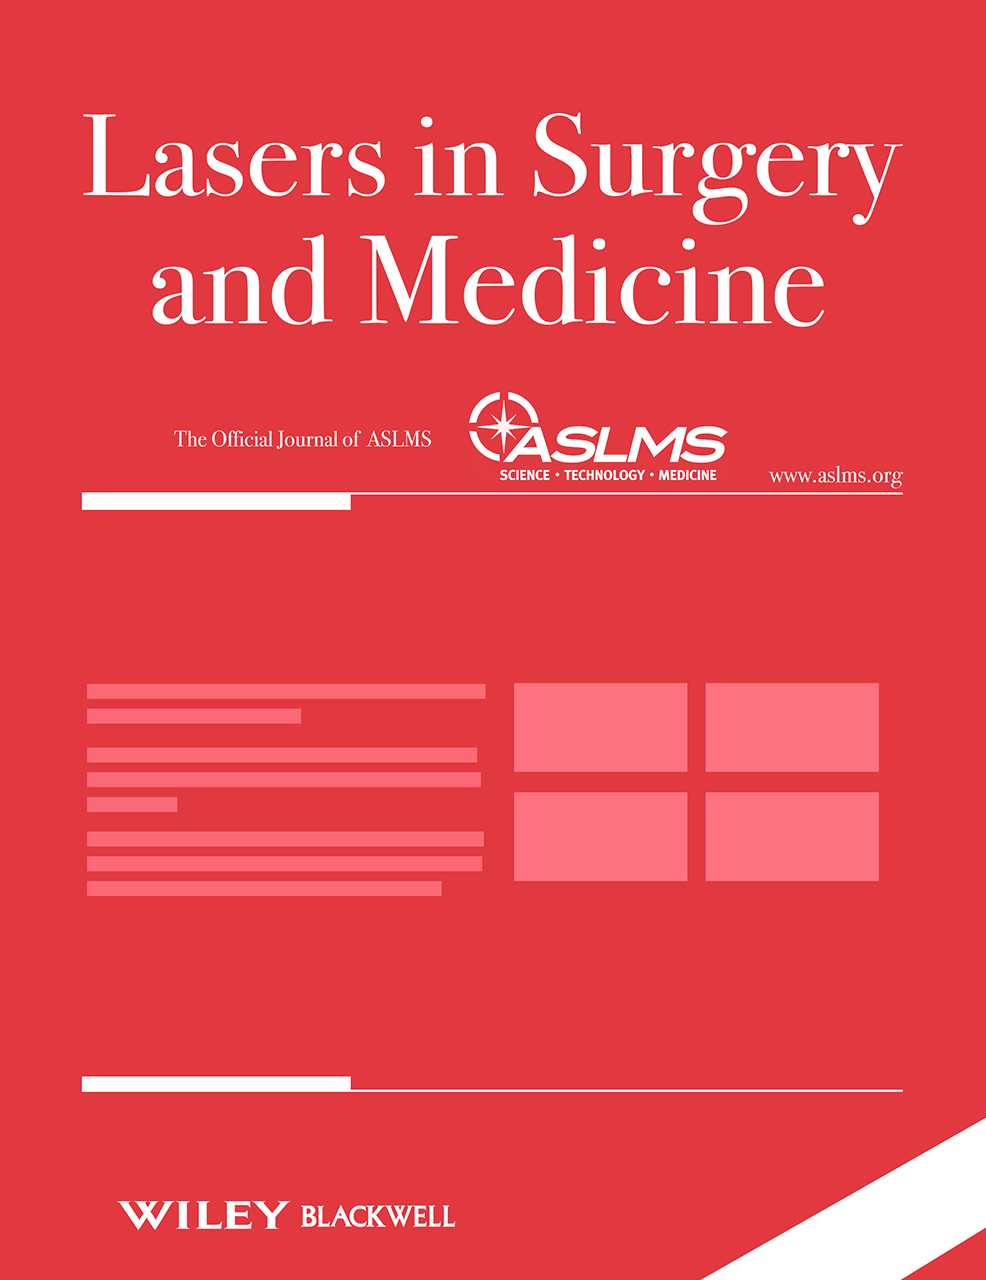 Lasers in Surgery and Medicine